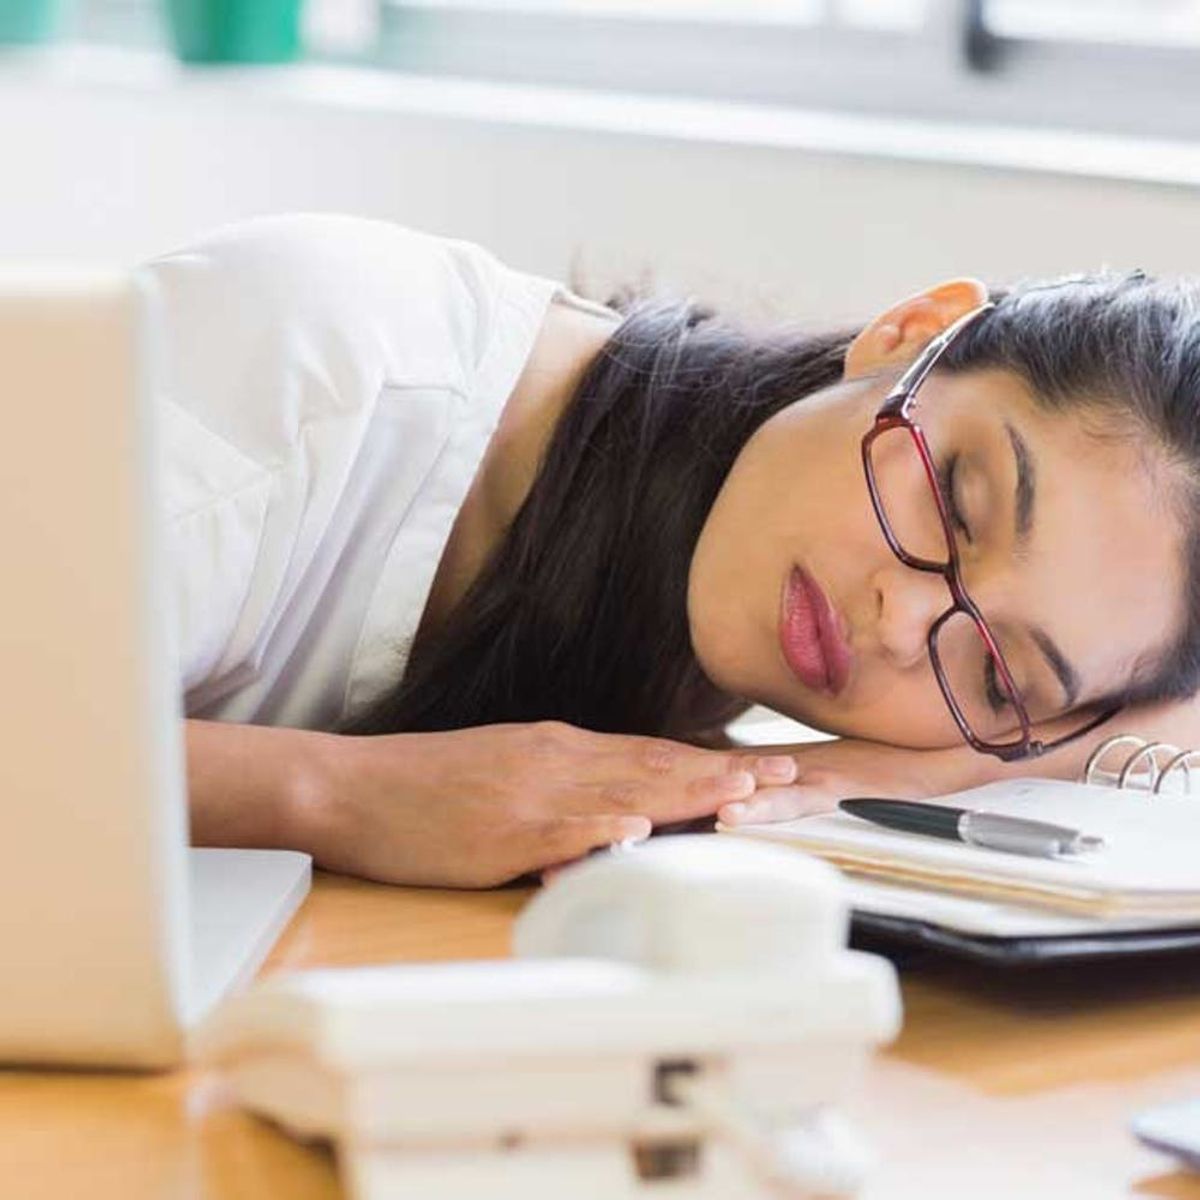 Why Napping at Work Isn’t as Crazy as You Might Think